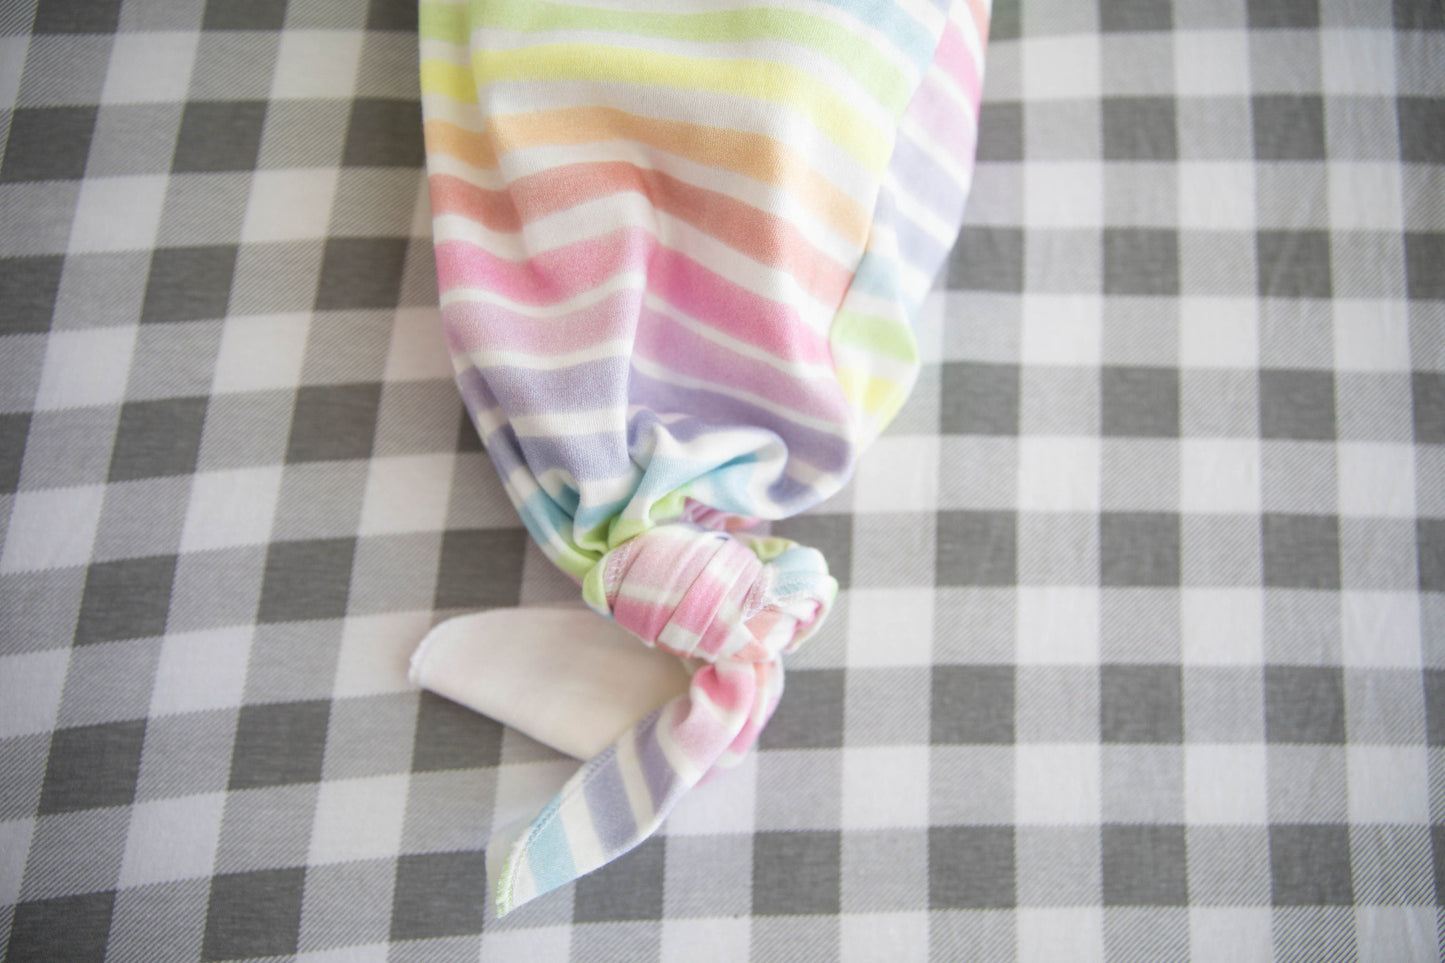 Rainbow Baby Knotted Gown | Newborn Baby Gown | Rainbow Baby Outfit | Gown and Hat